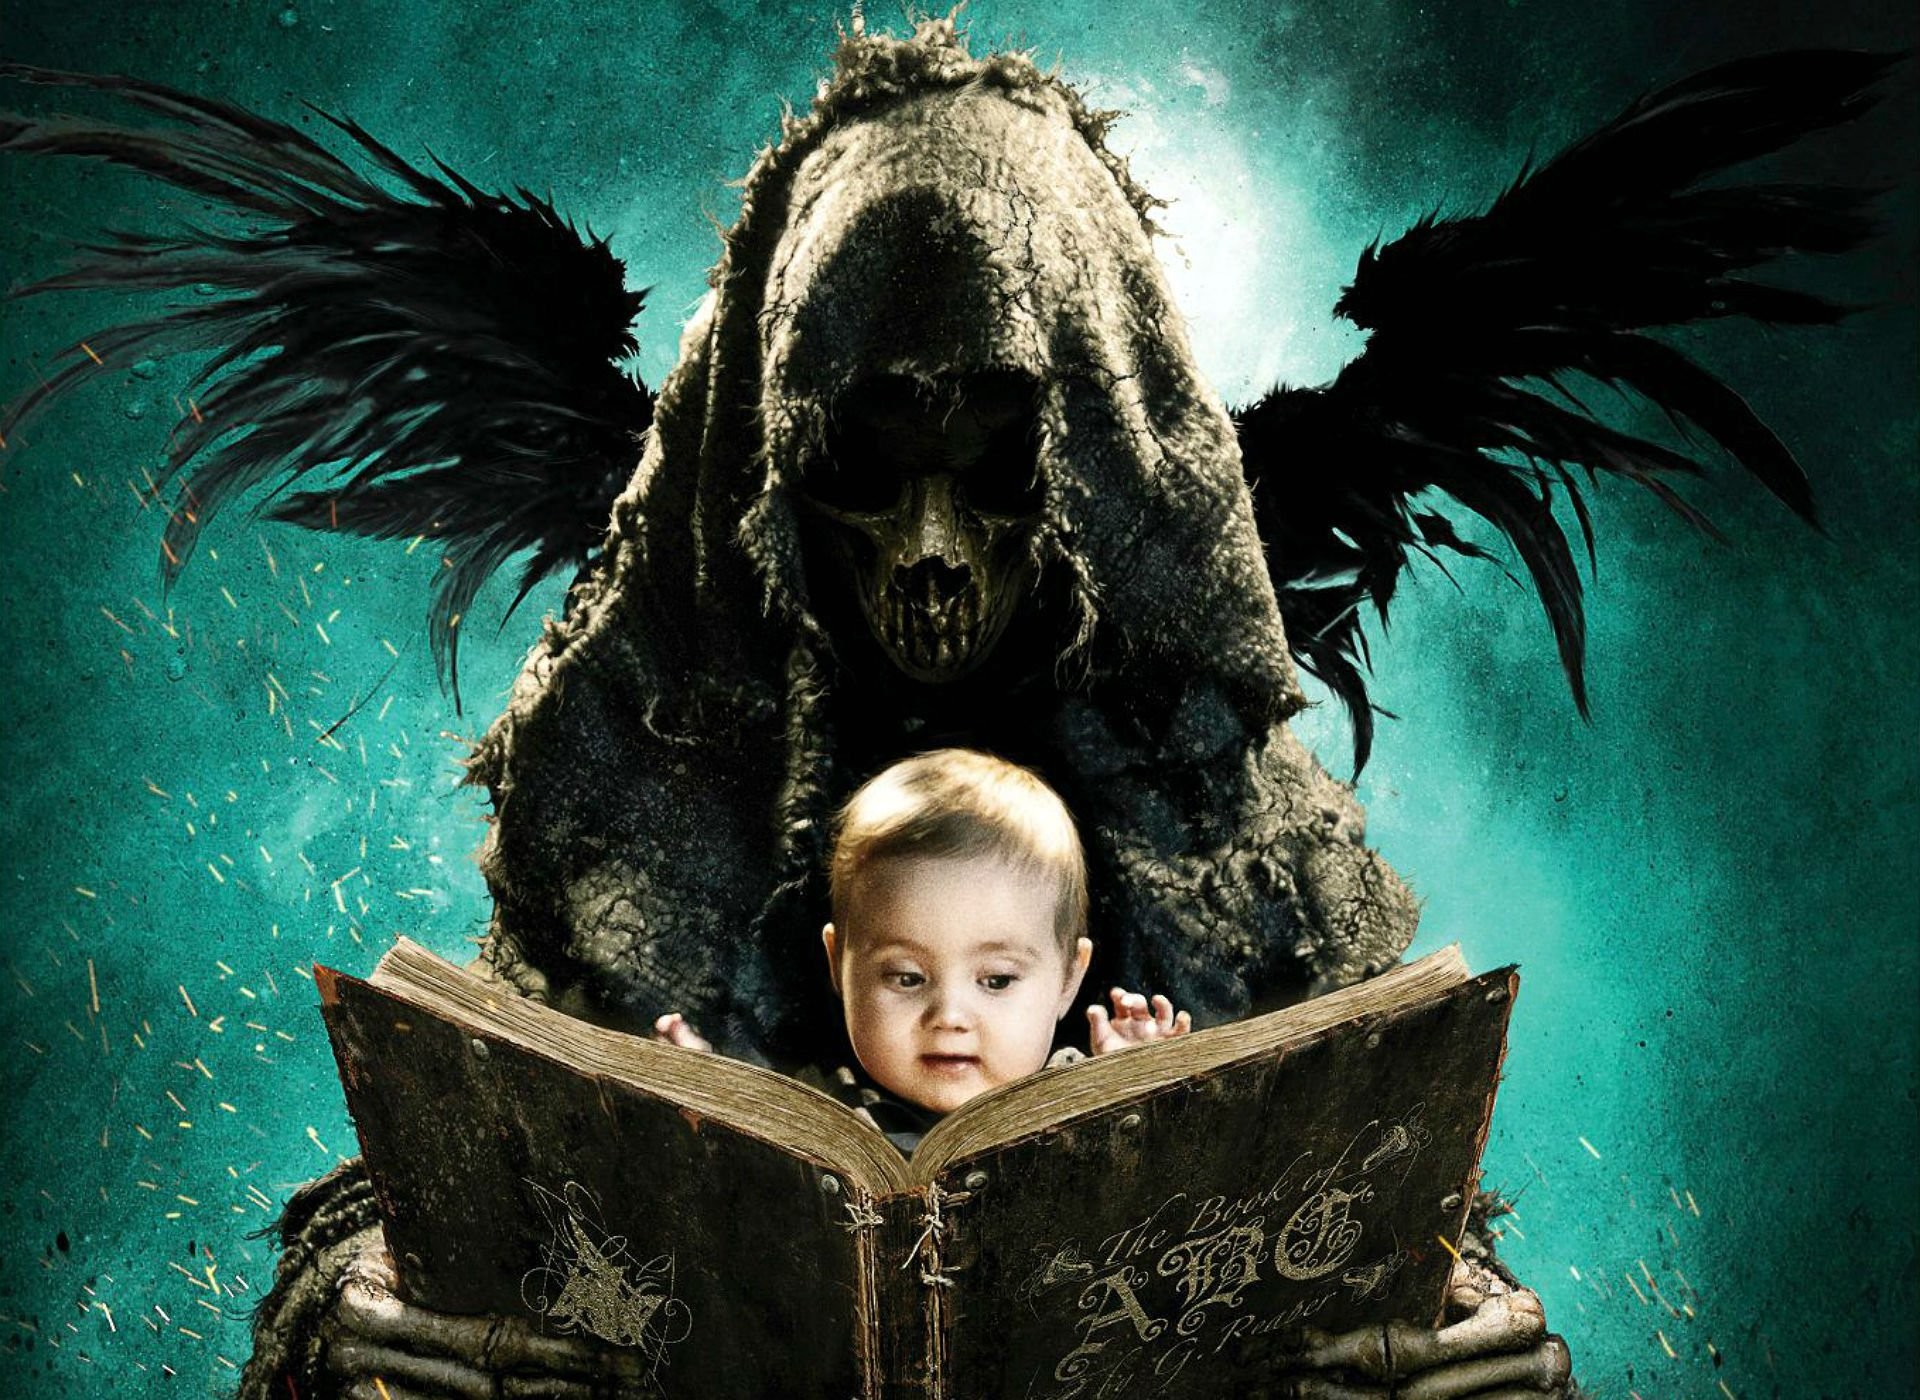 1920x1400 ABCs OF DEATH comedy horror dark anthology death evil reaper angel baby  wallpaper |  | 498244 | WallpaperUP